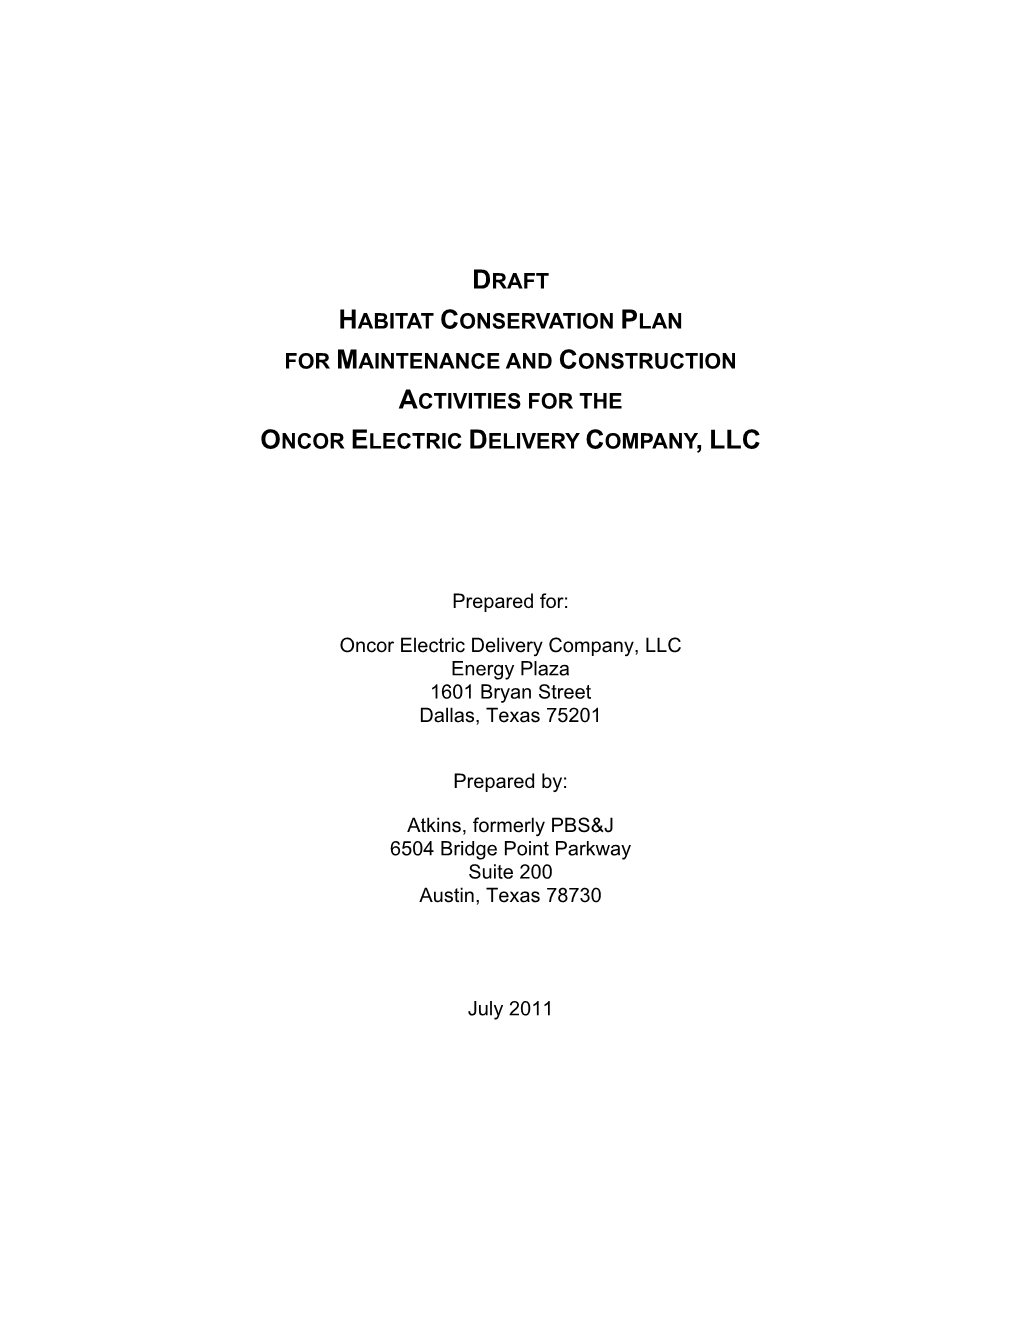 Draft Habitat Conservation Plan for Maintenance and Construction Activities for the Oncor Electric Delivery Company, Llc